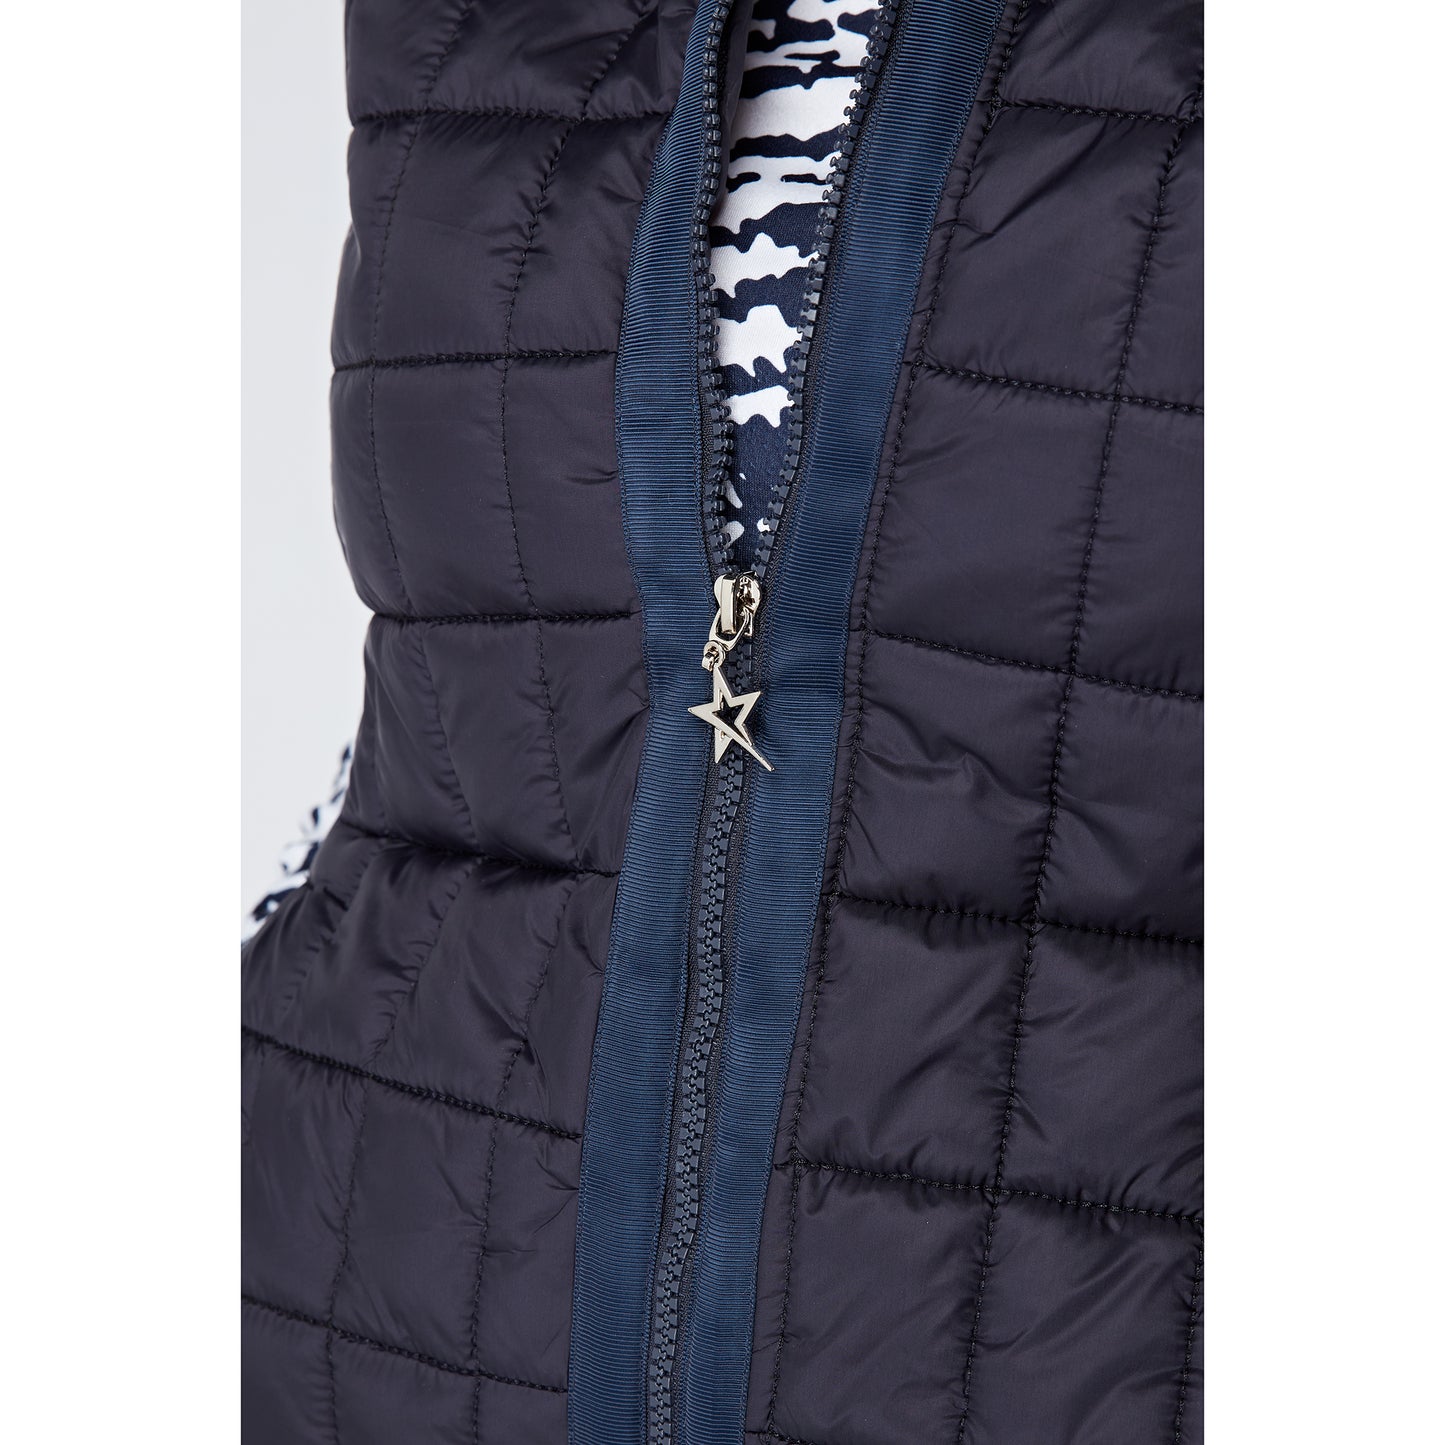 Swing Out Sister Ladies Padded Gilet with Soft-Stretch Side Panels in Navy